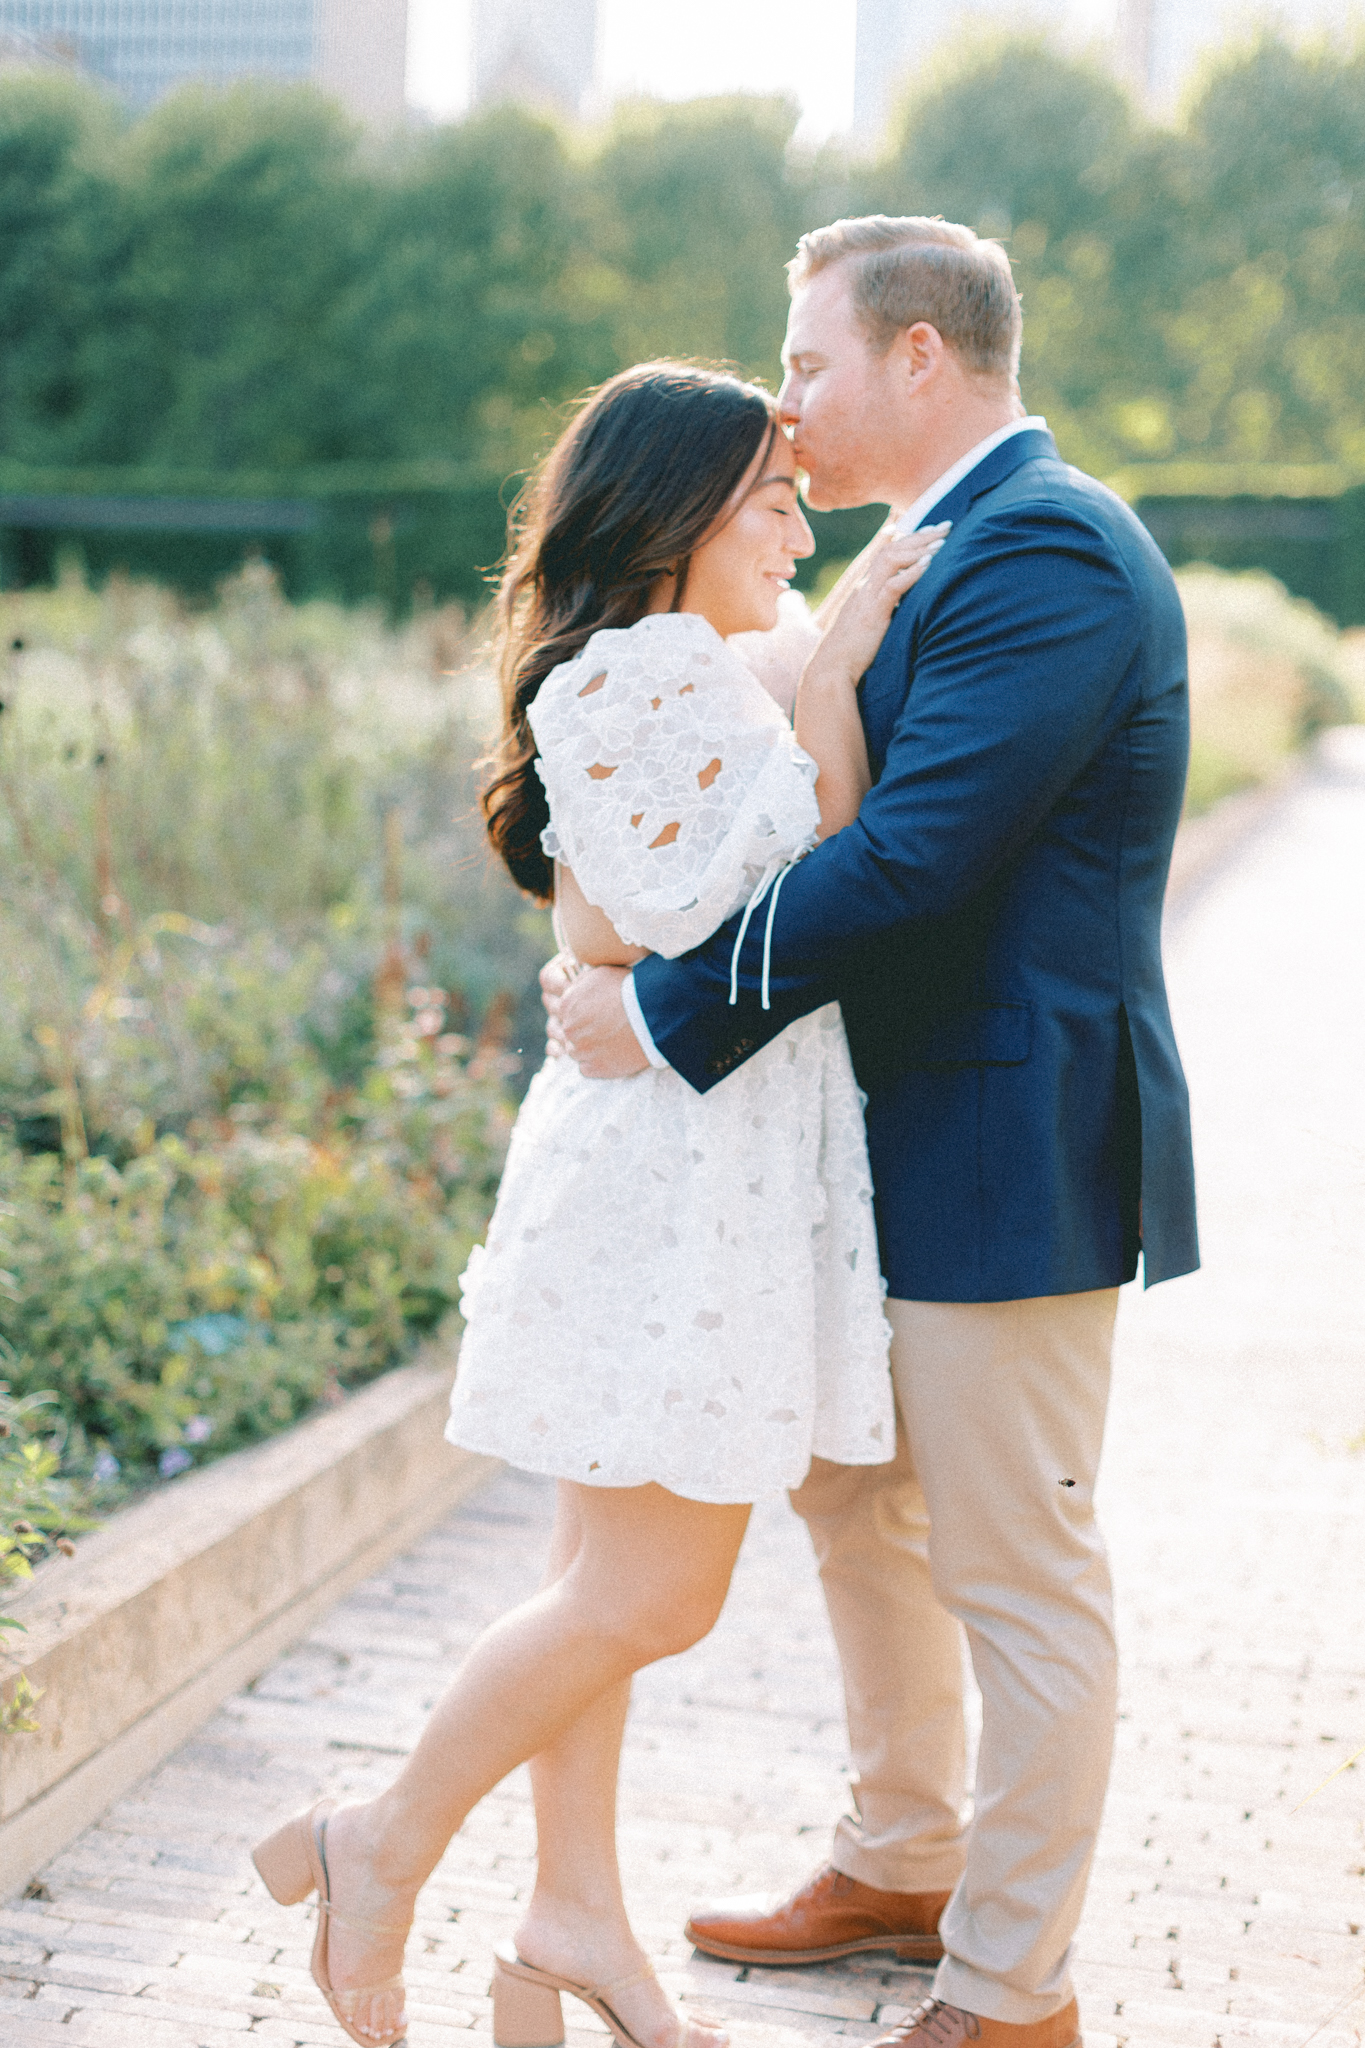 downtown-chicago-engagement-session-lurie-garden-art-institute-hayley-moore-photography